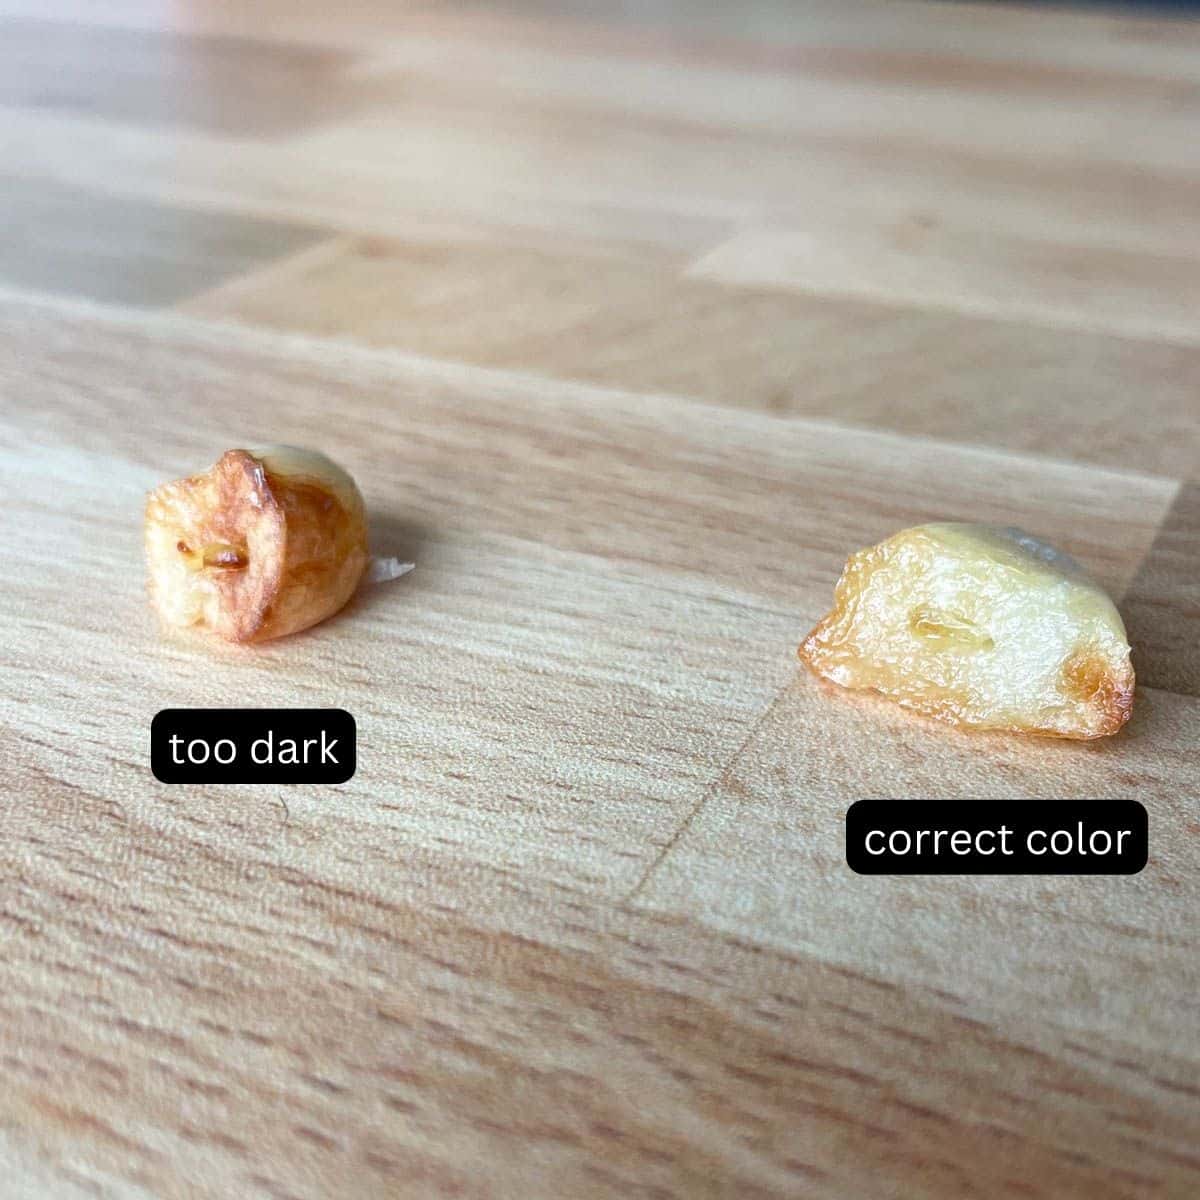 Two cloves of garlic are shown; one is dark brown and labeled "too dark", and the other is golden brown and labeled "correct color."